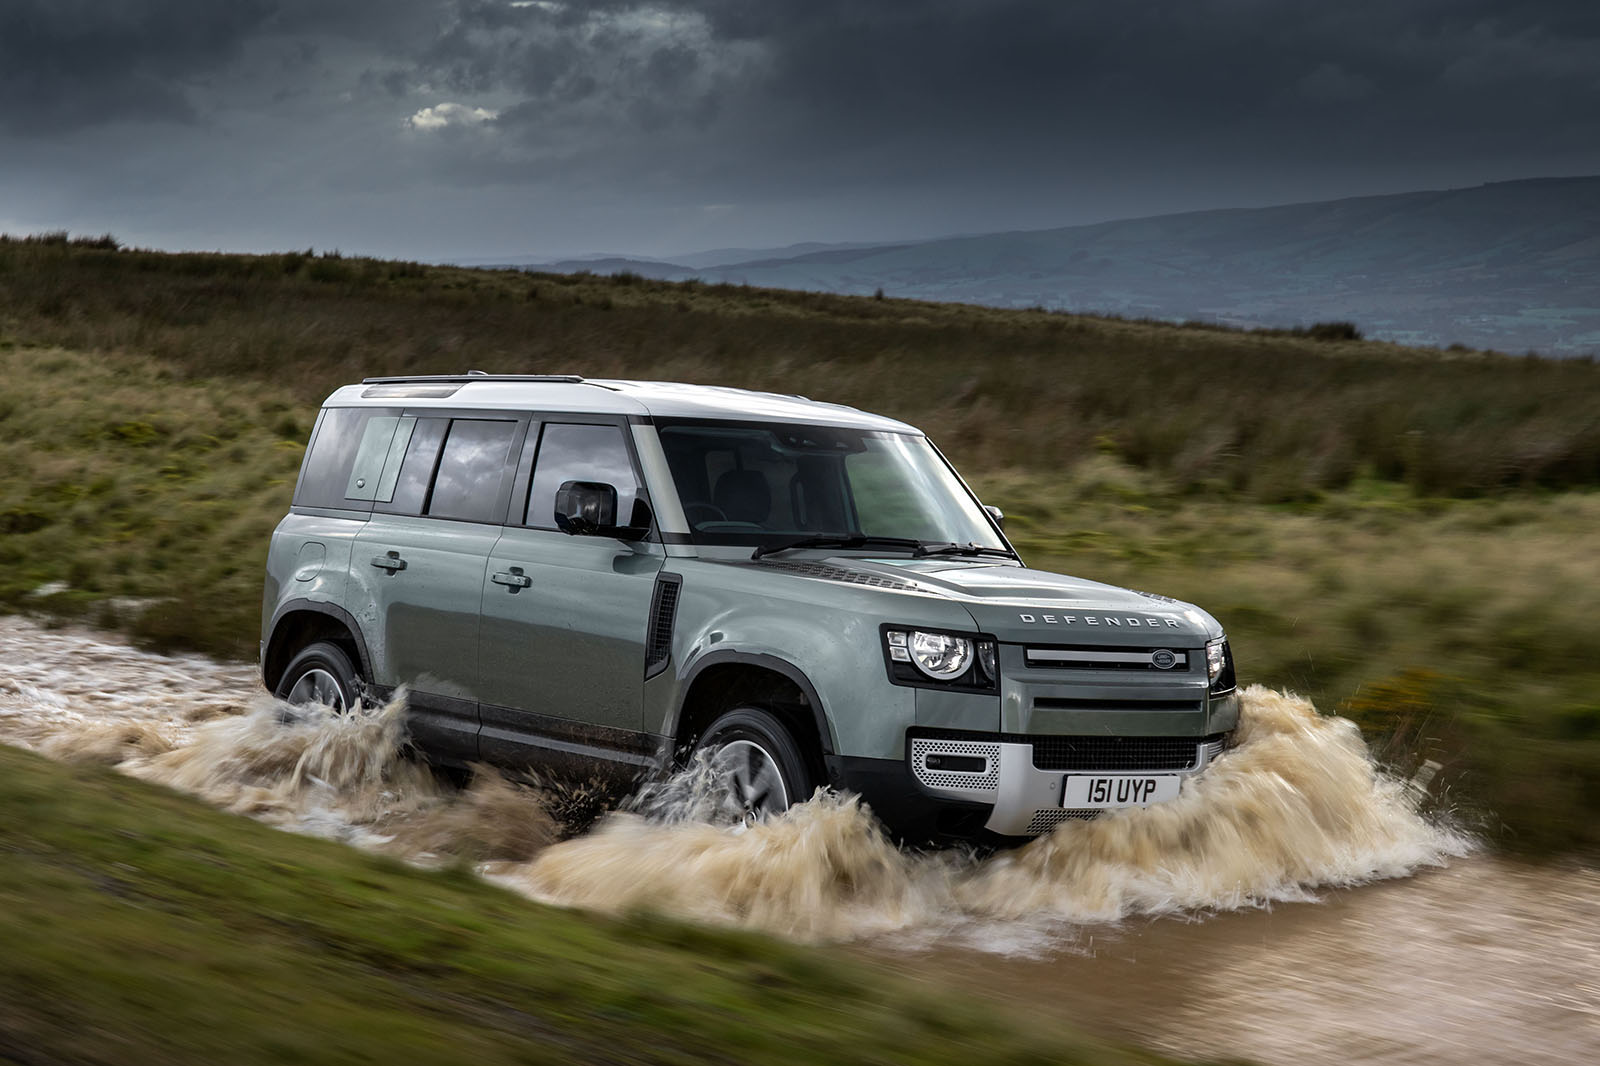 https://www.autocar.co.uk/sites/autocar.co.uk/files/images/car-reviews/first-drives/legacy/10-land-rover-defender-top-10.jpg